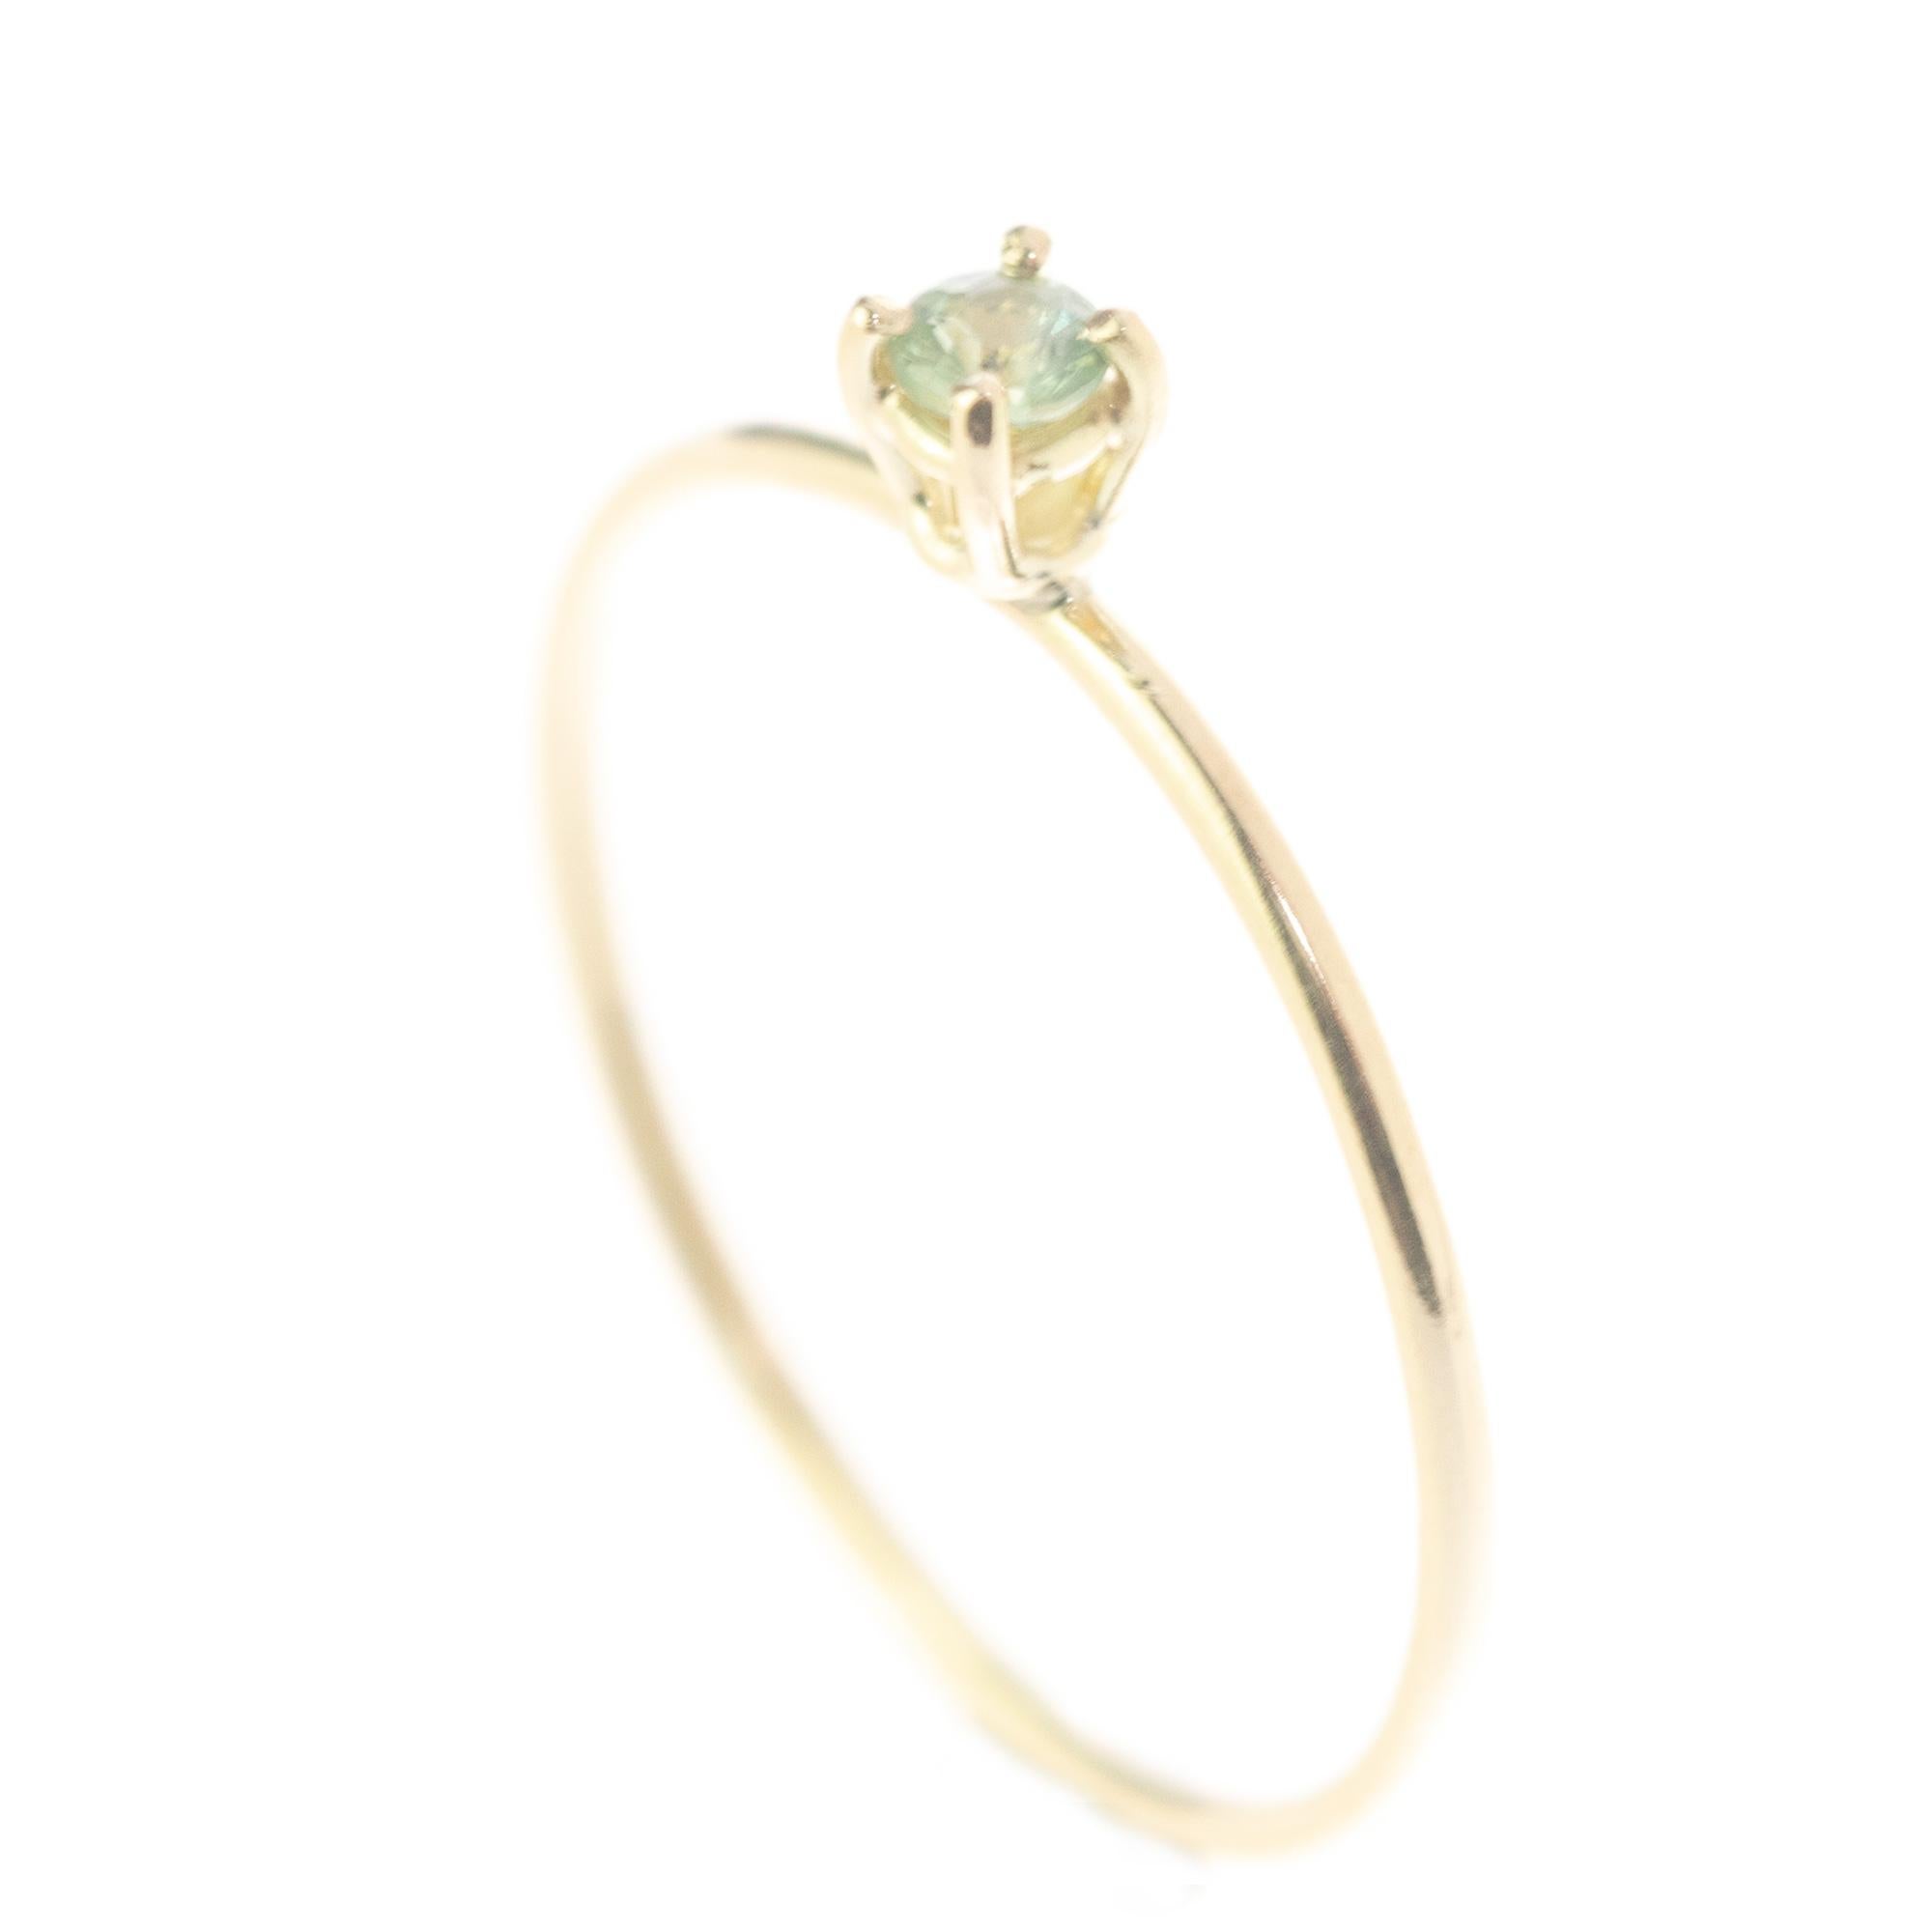 Signature INTINI Jewels green sapphire jewellery. Modern and elegant ring design in 14k yellow gold with an brilliant cut with tiny griffes sormounting the ring.

The meaning of green sapphires is that it symbolizes tranquility and calmness. A green